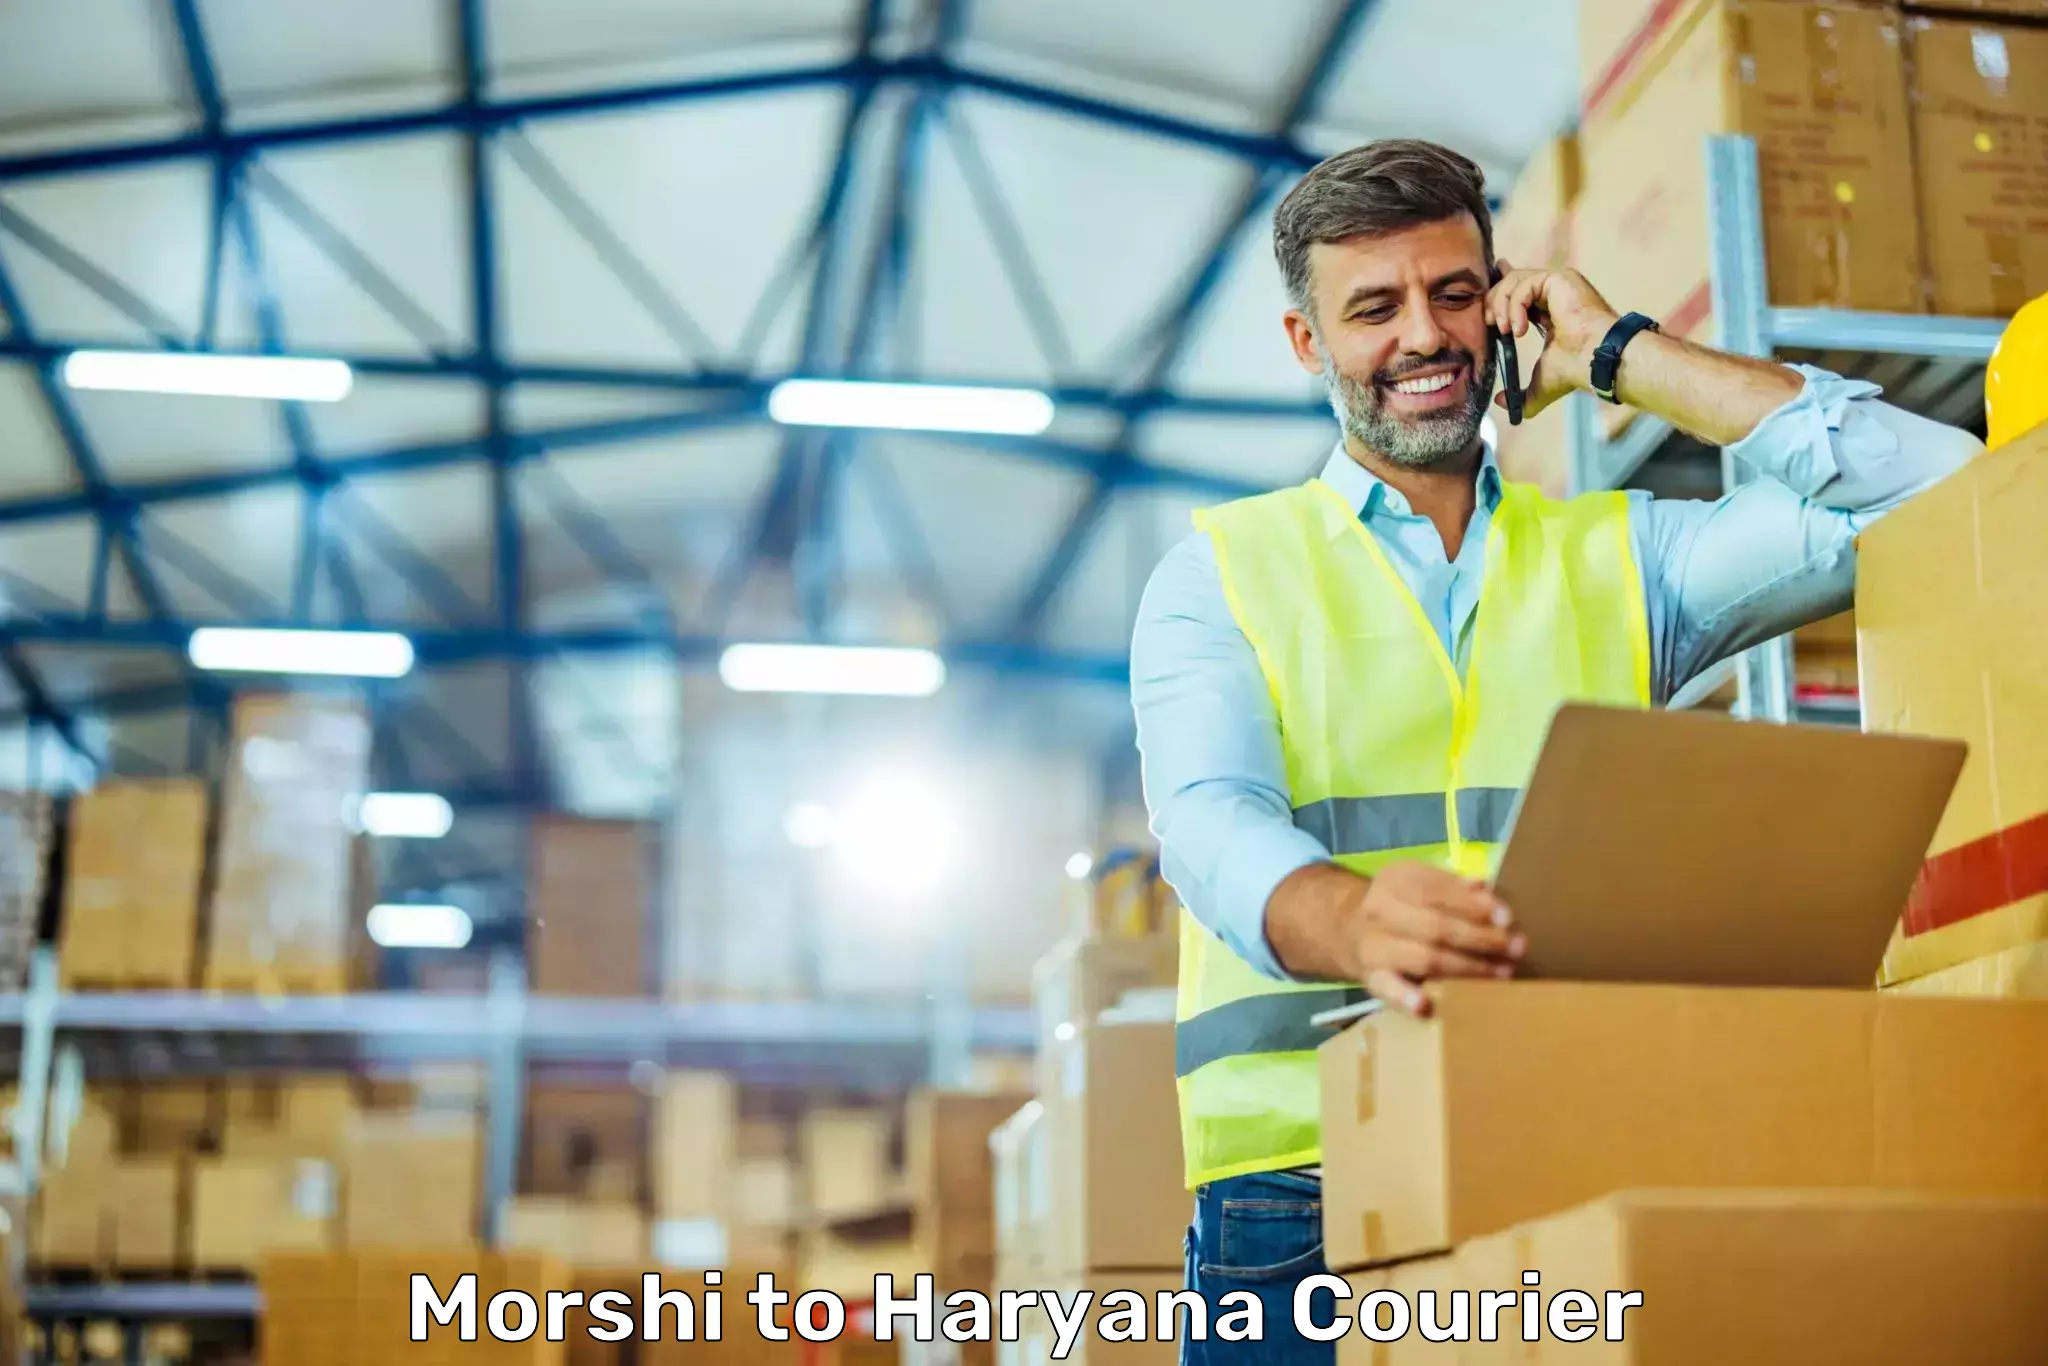 Courier tracking online Morshi to Gurgaon